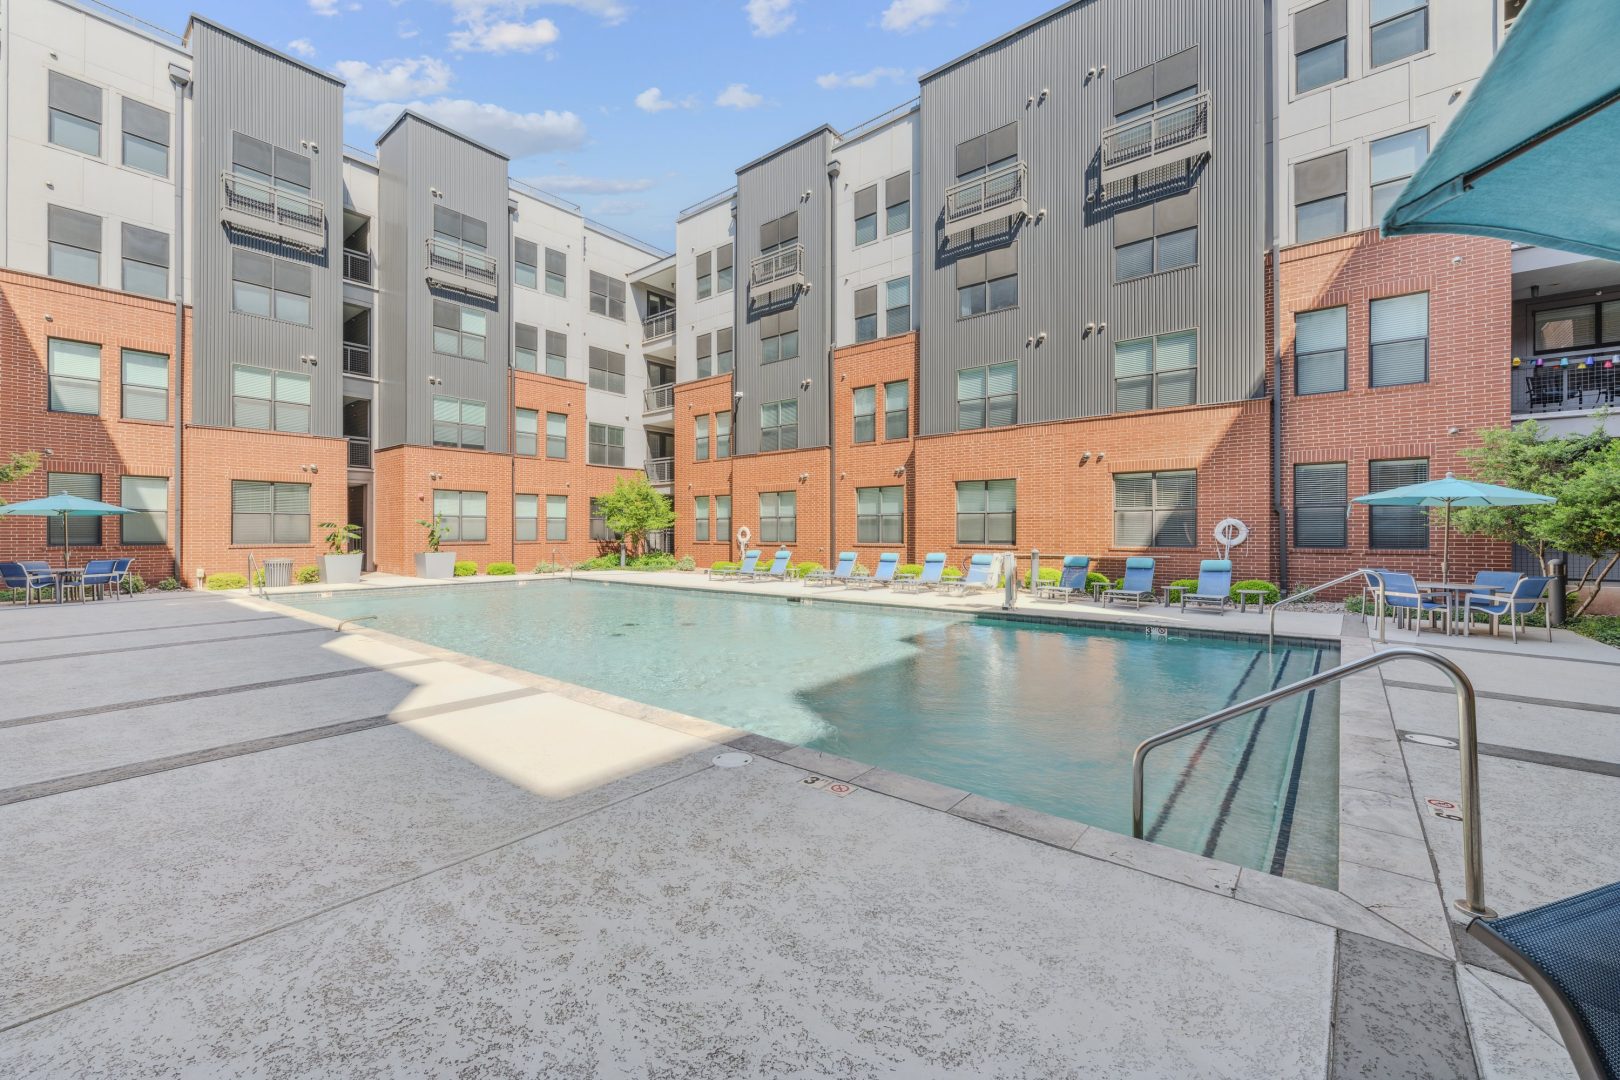 the pool at The Steelyard Apartments